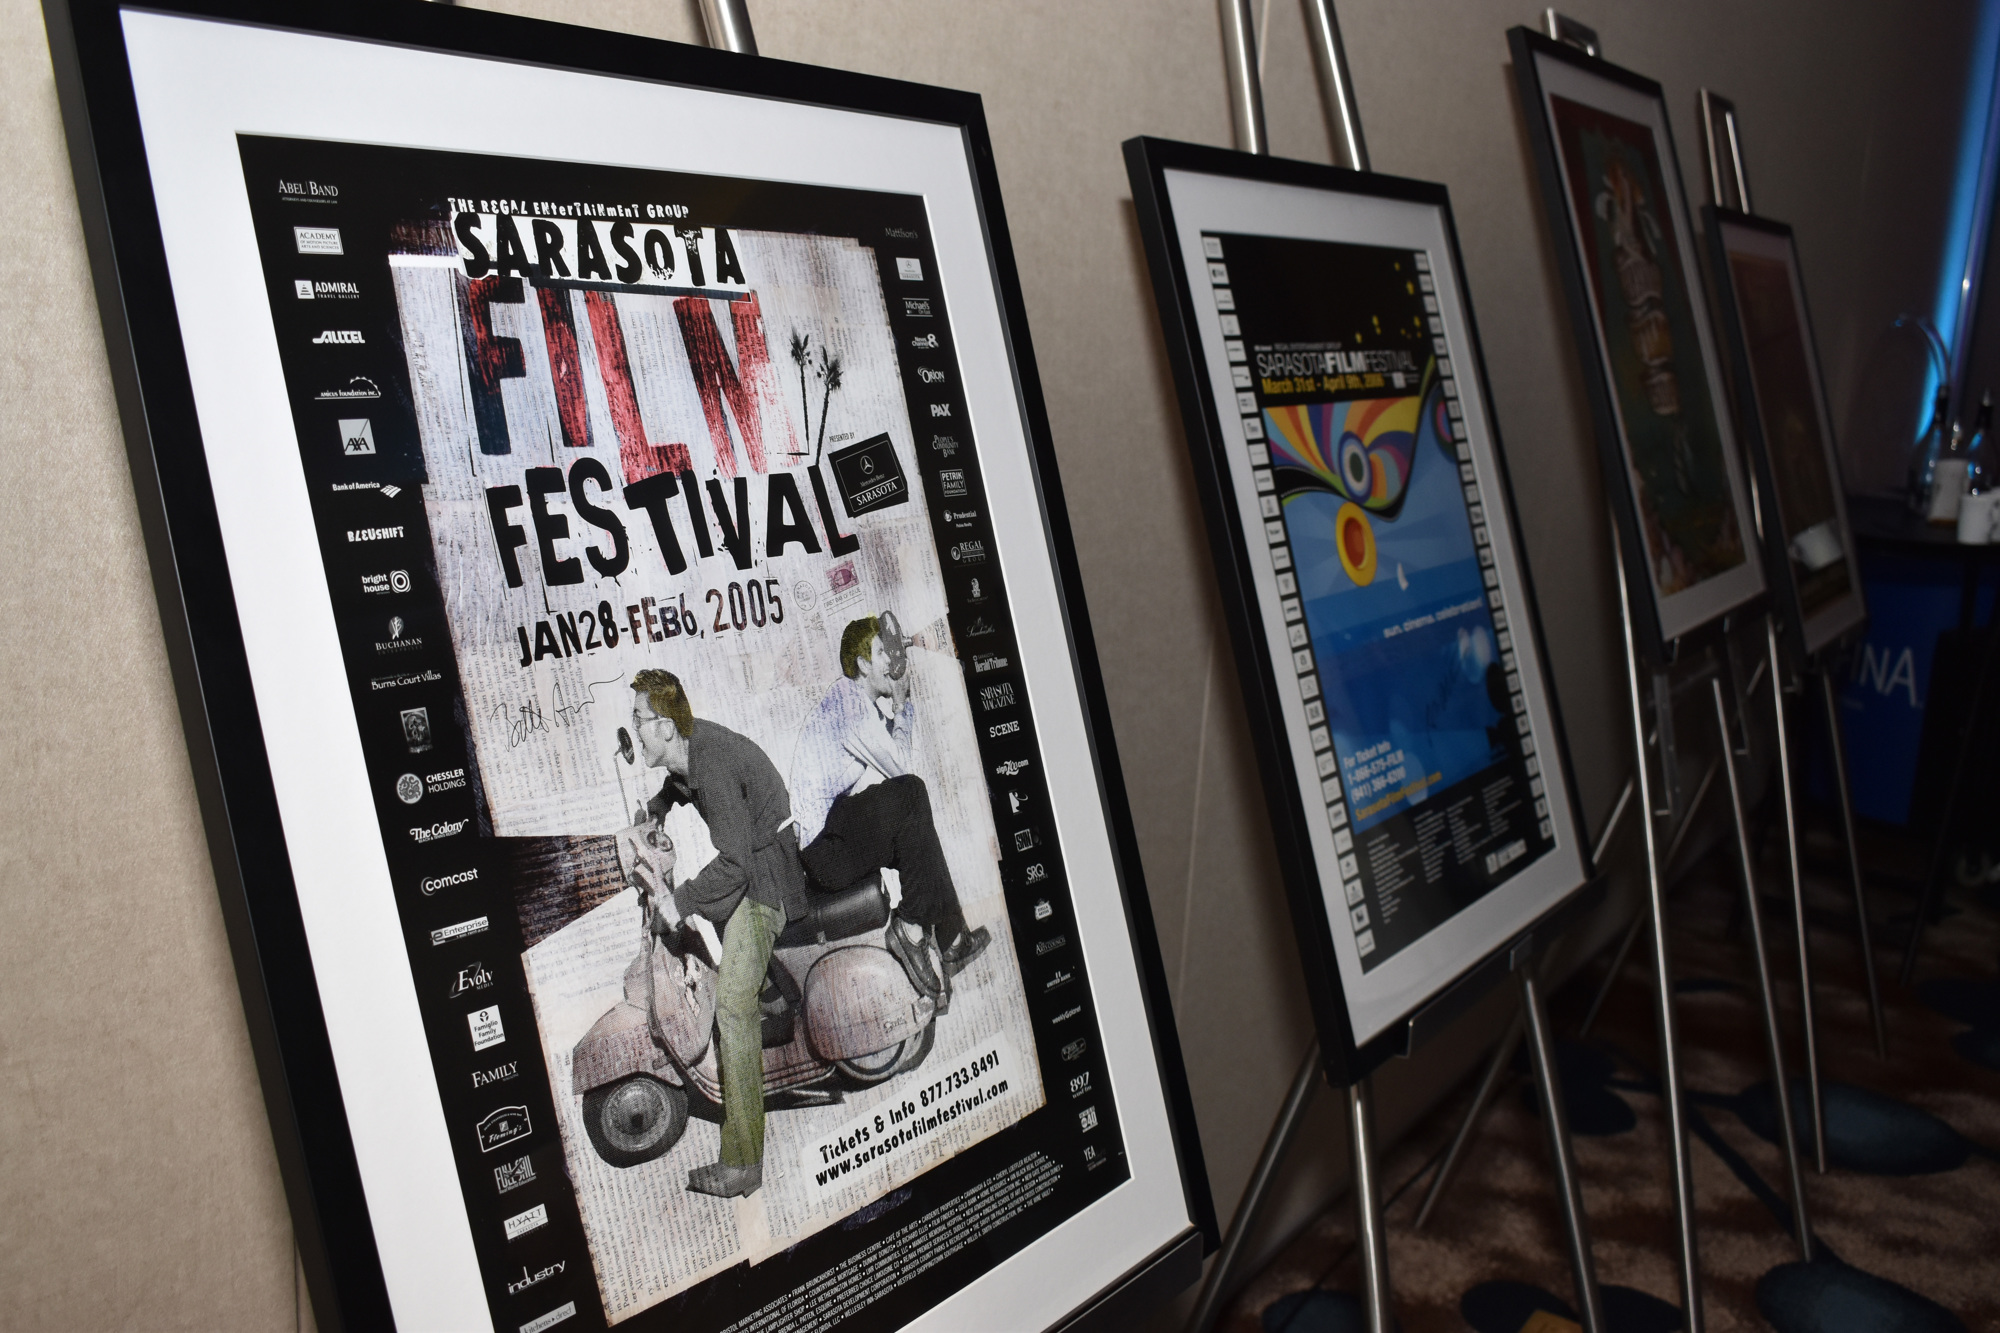 Several posters from past festivals were on display. Photo by Niki Kottmann